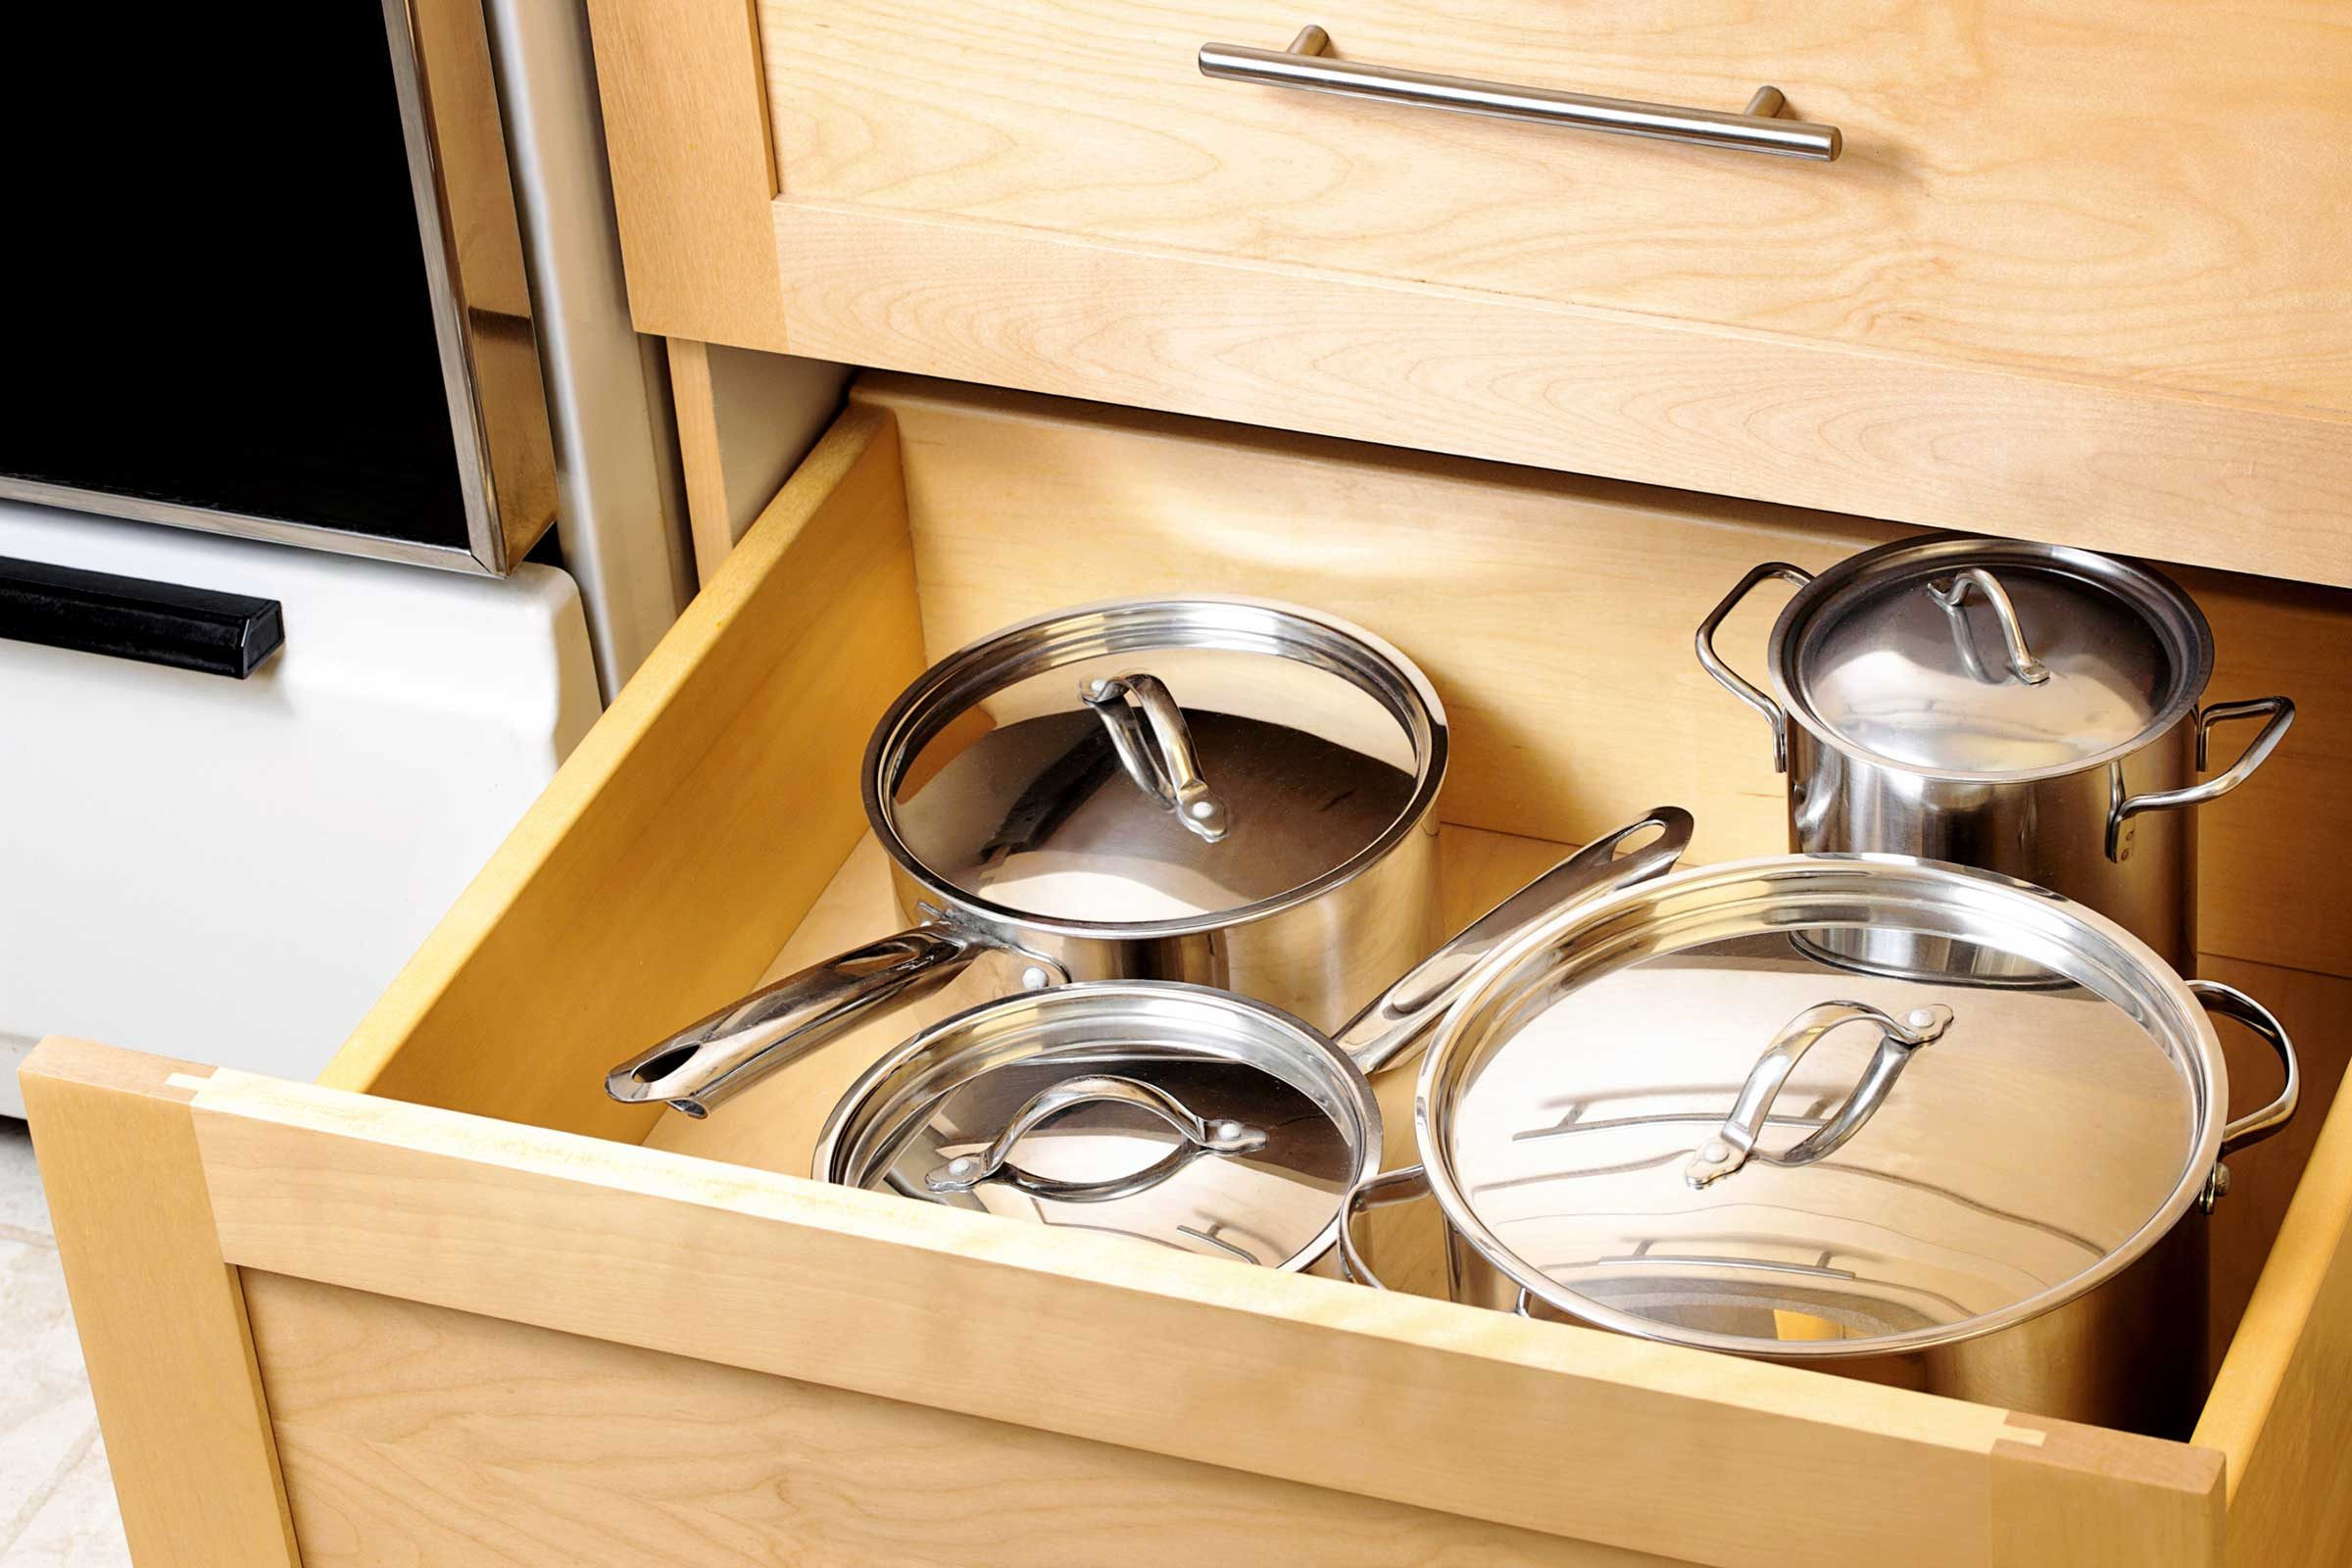 Kitchen Pots And Pans Organizer
 How to Organize Pots and Pans